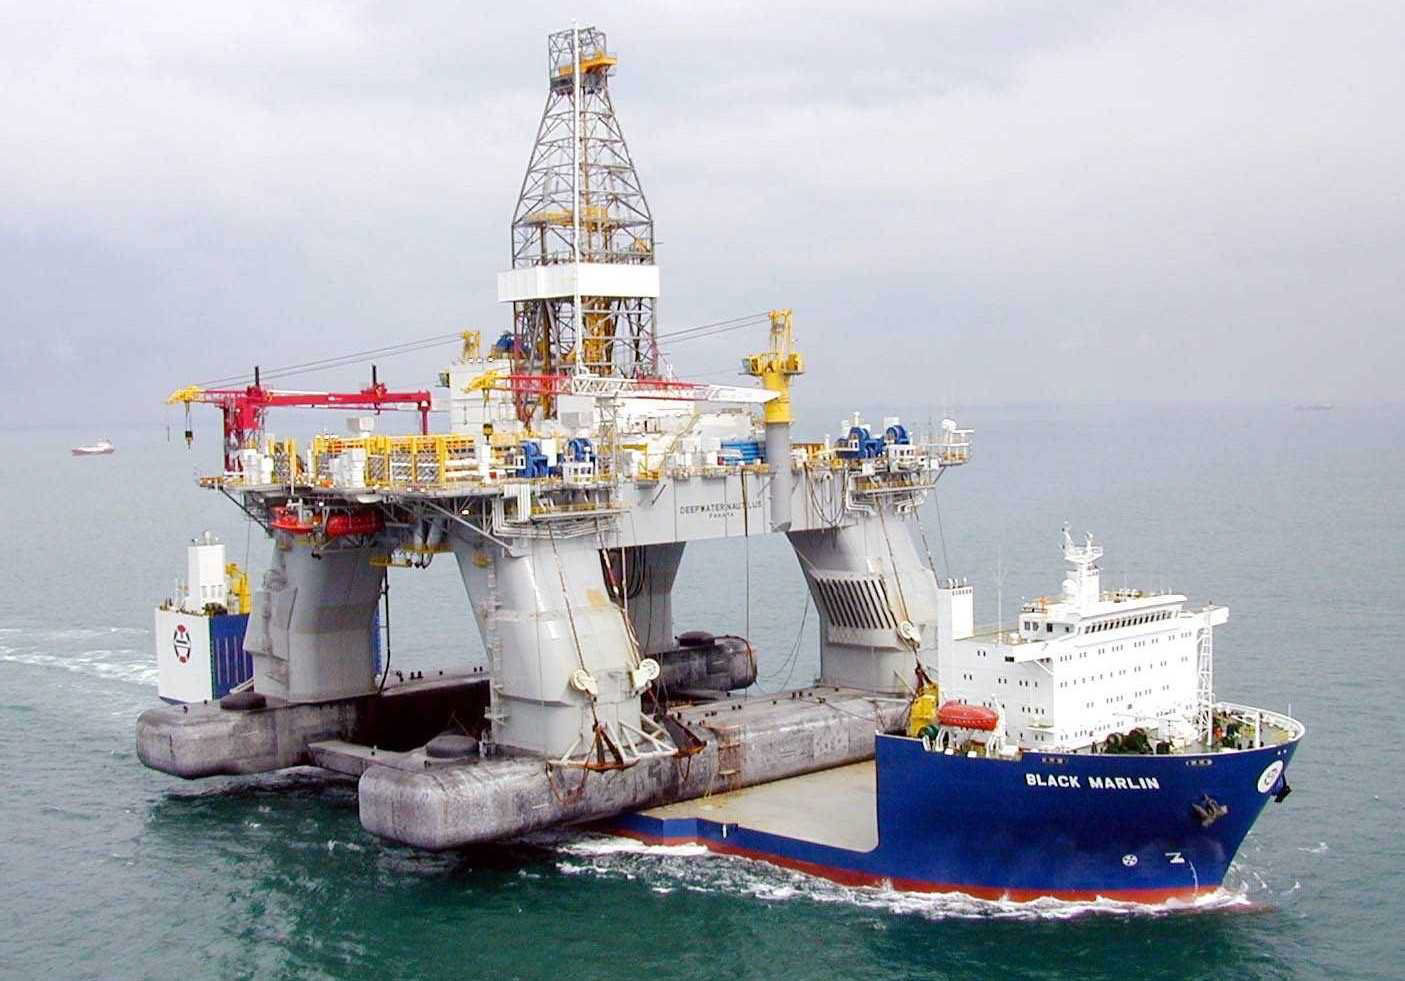 Deep Horizon Oil Platform Being Transported Into Drilling Location